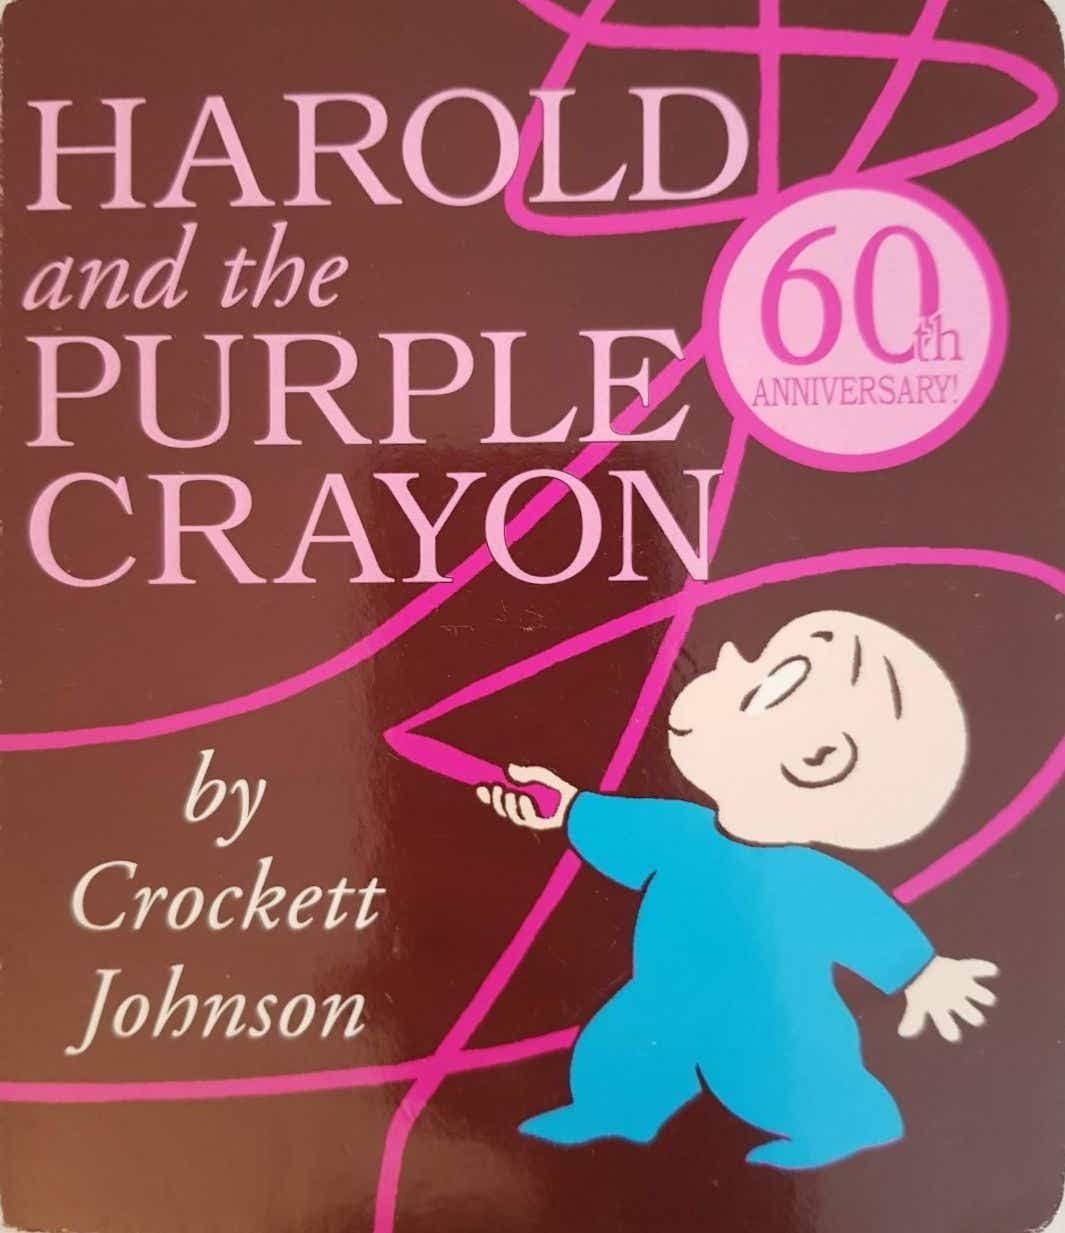 Harold and the Purple Crayon Very Good Not Appicable  (4619394744375)